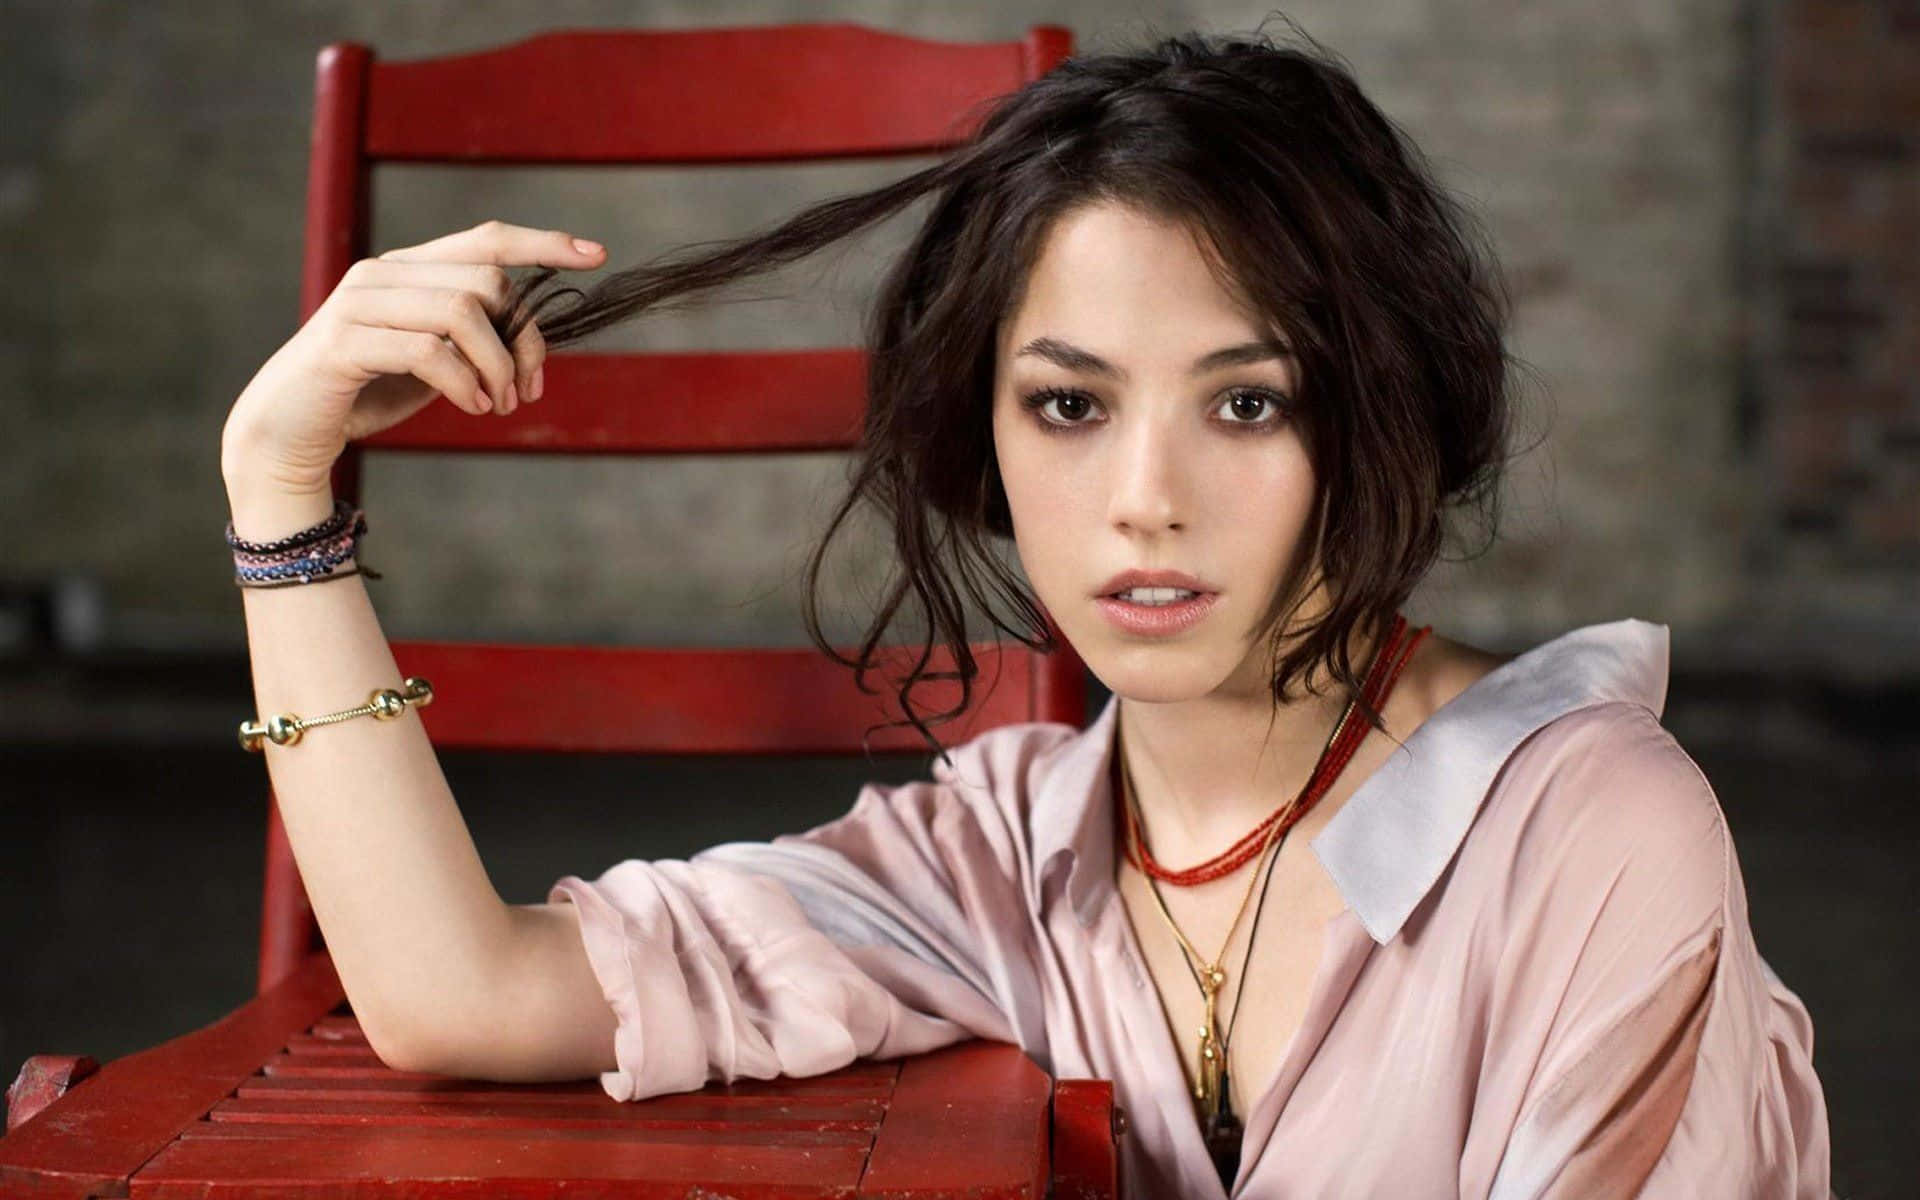 Olivia Thirlby striking a pose against a colorful backdrop Wallpaper